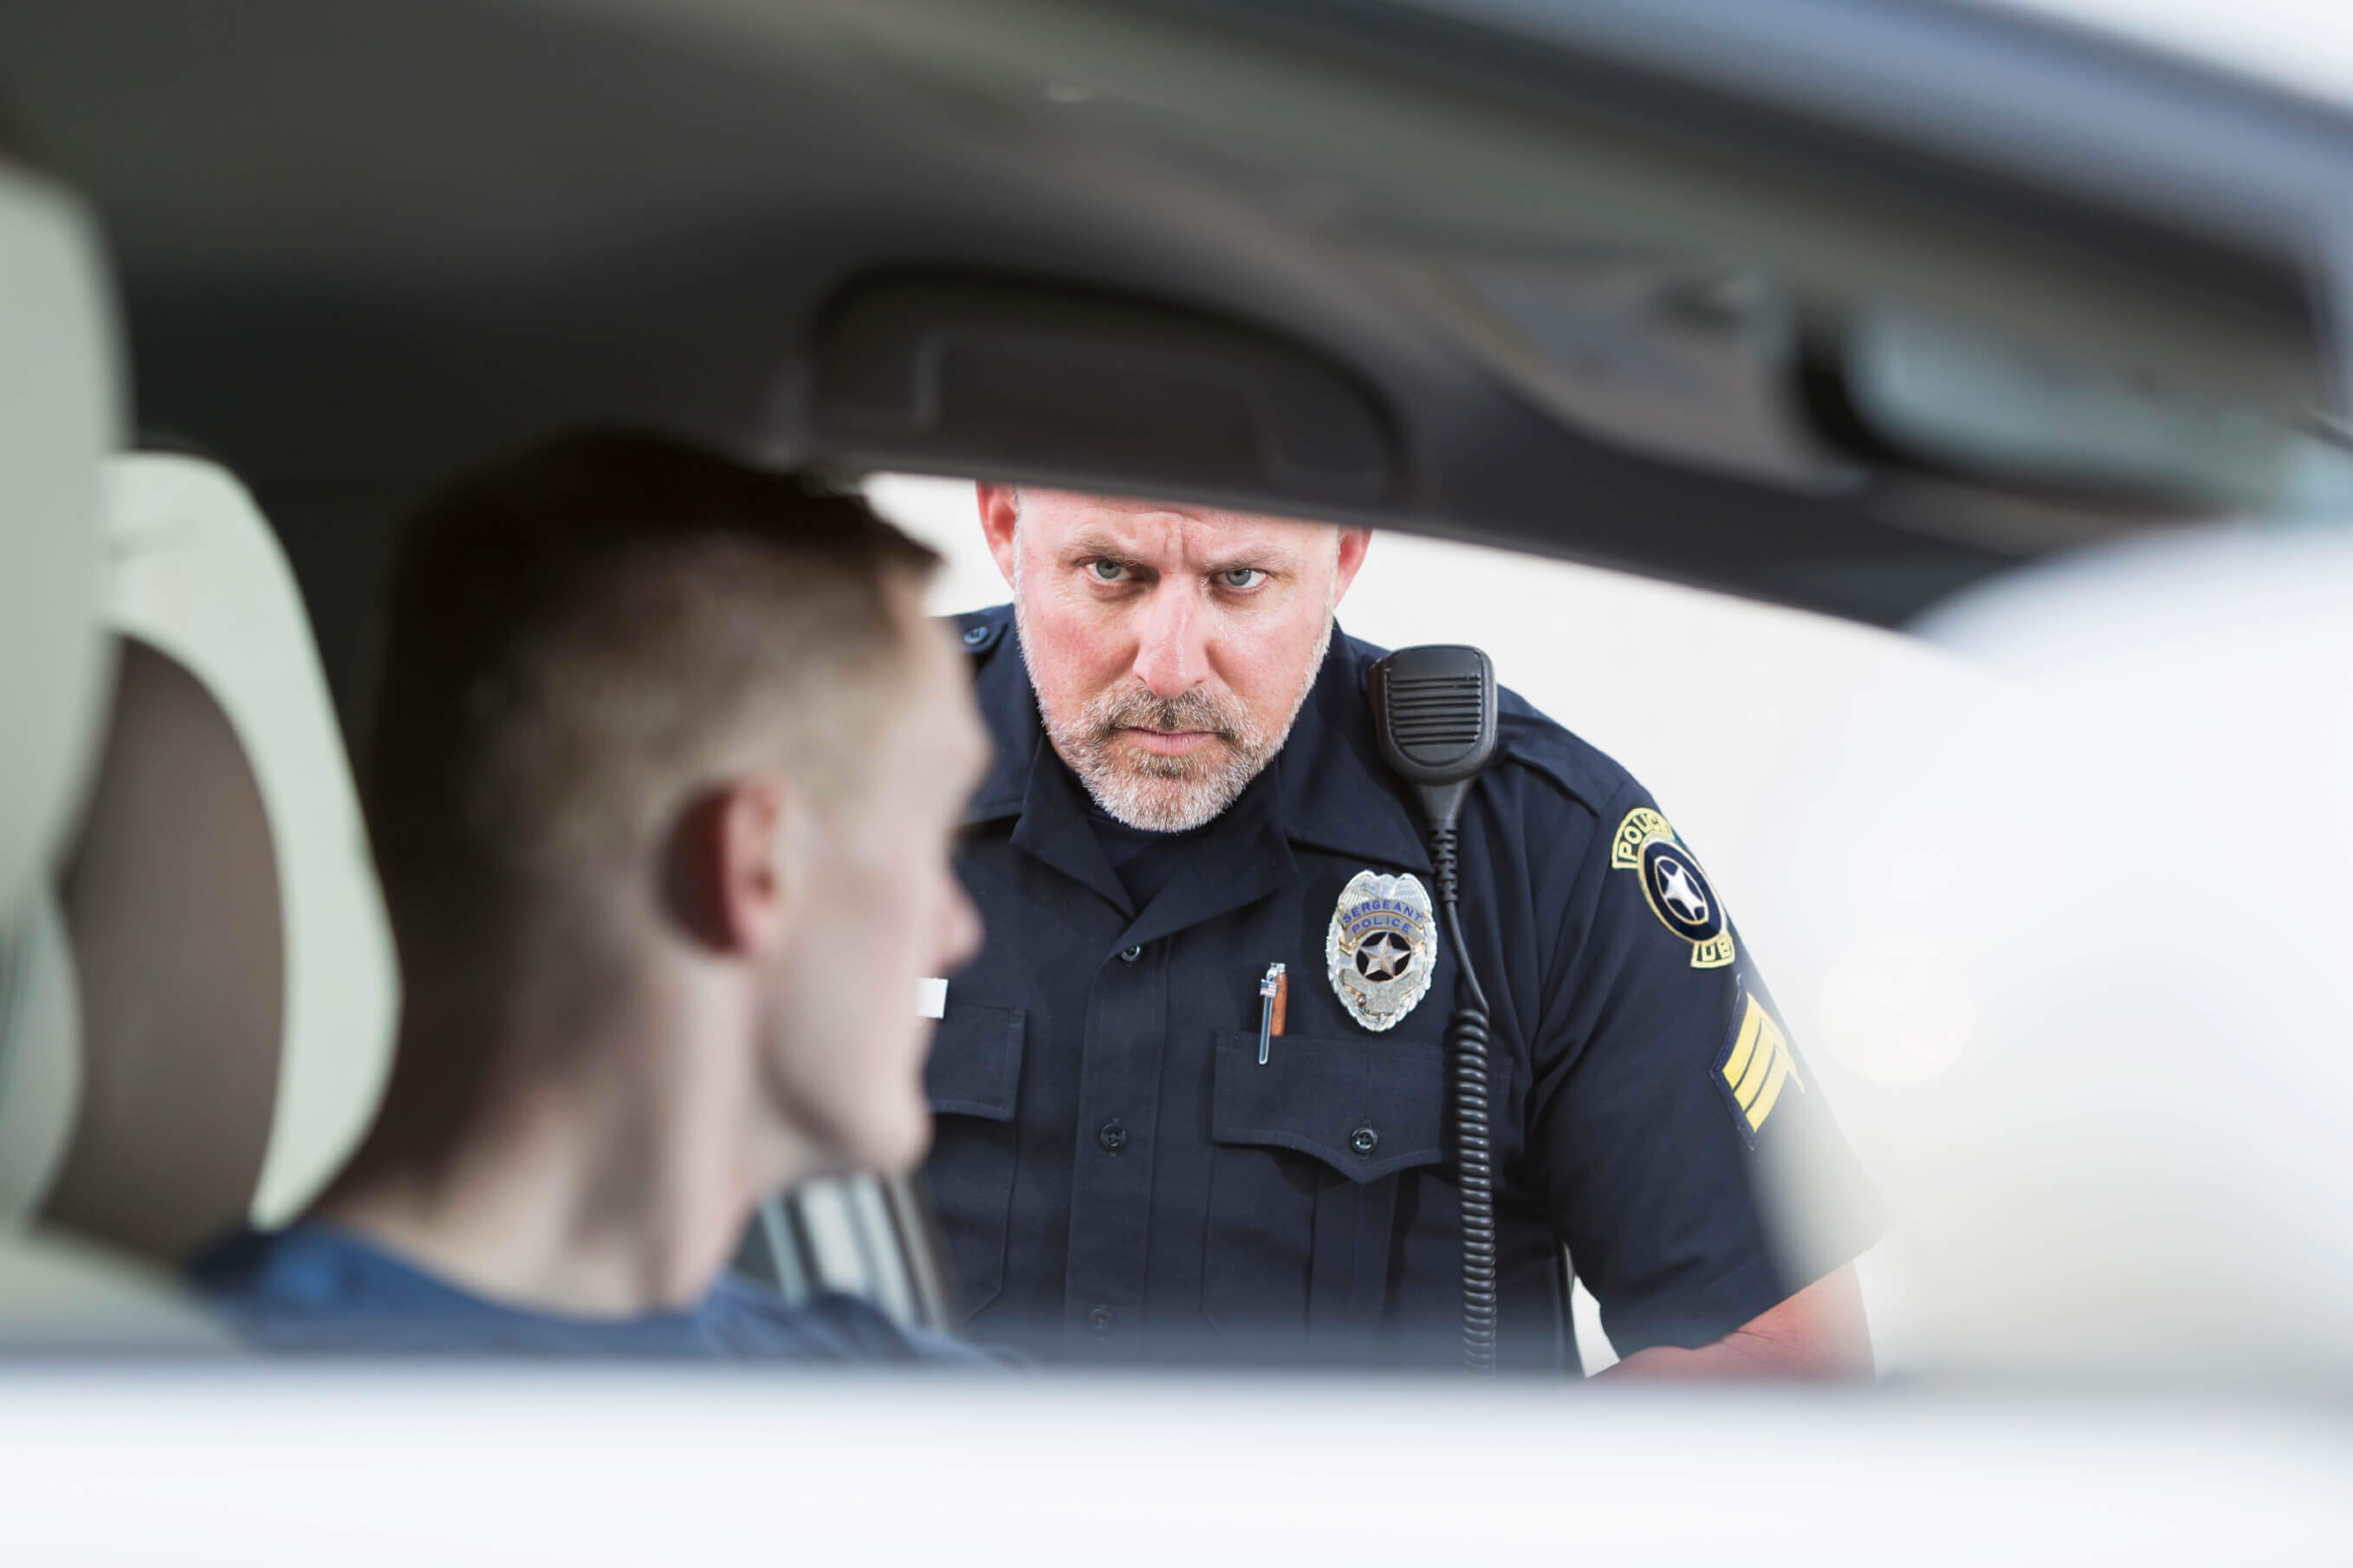 Policeman stopping a driver - checkpoints California